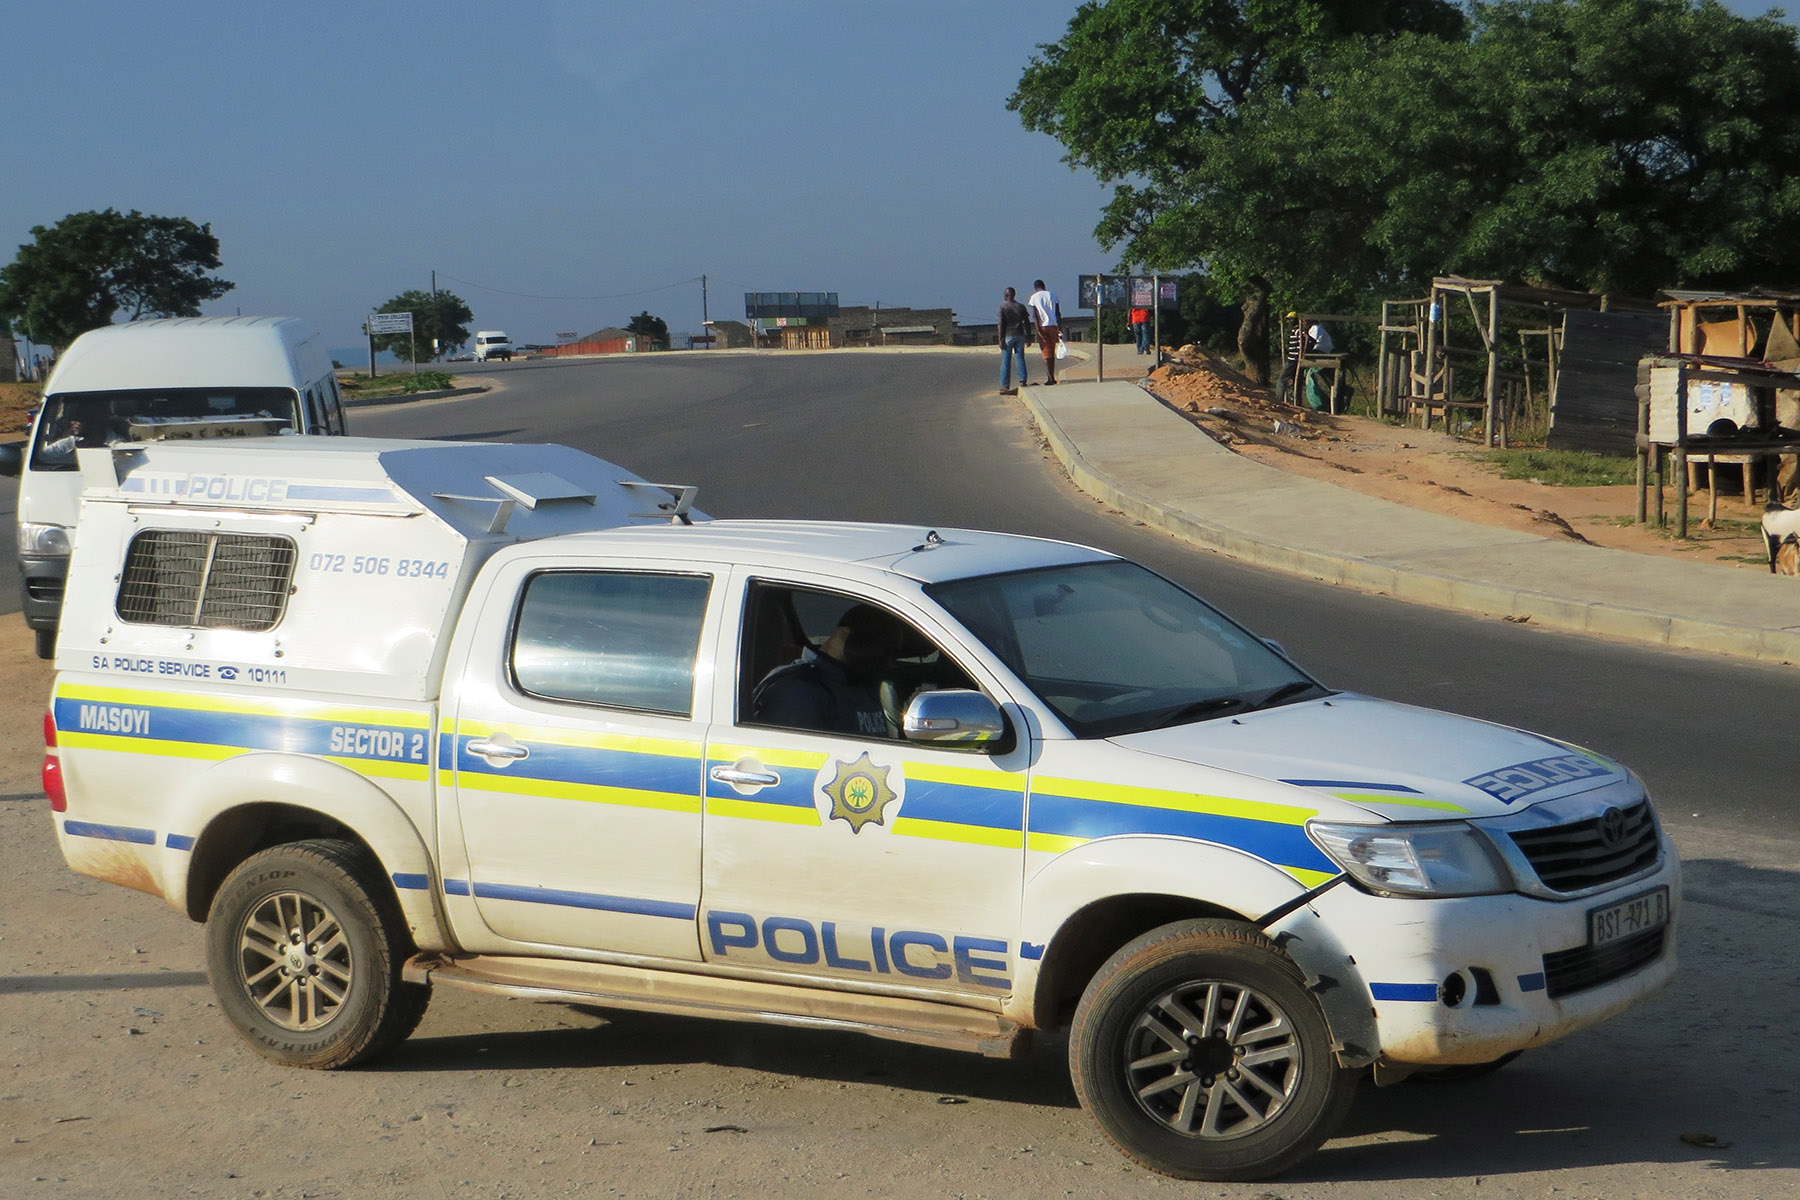 A South African police vehicle on the road